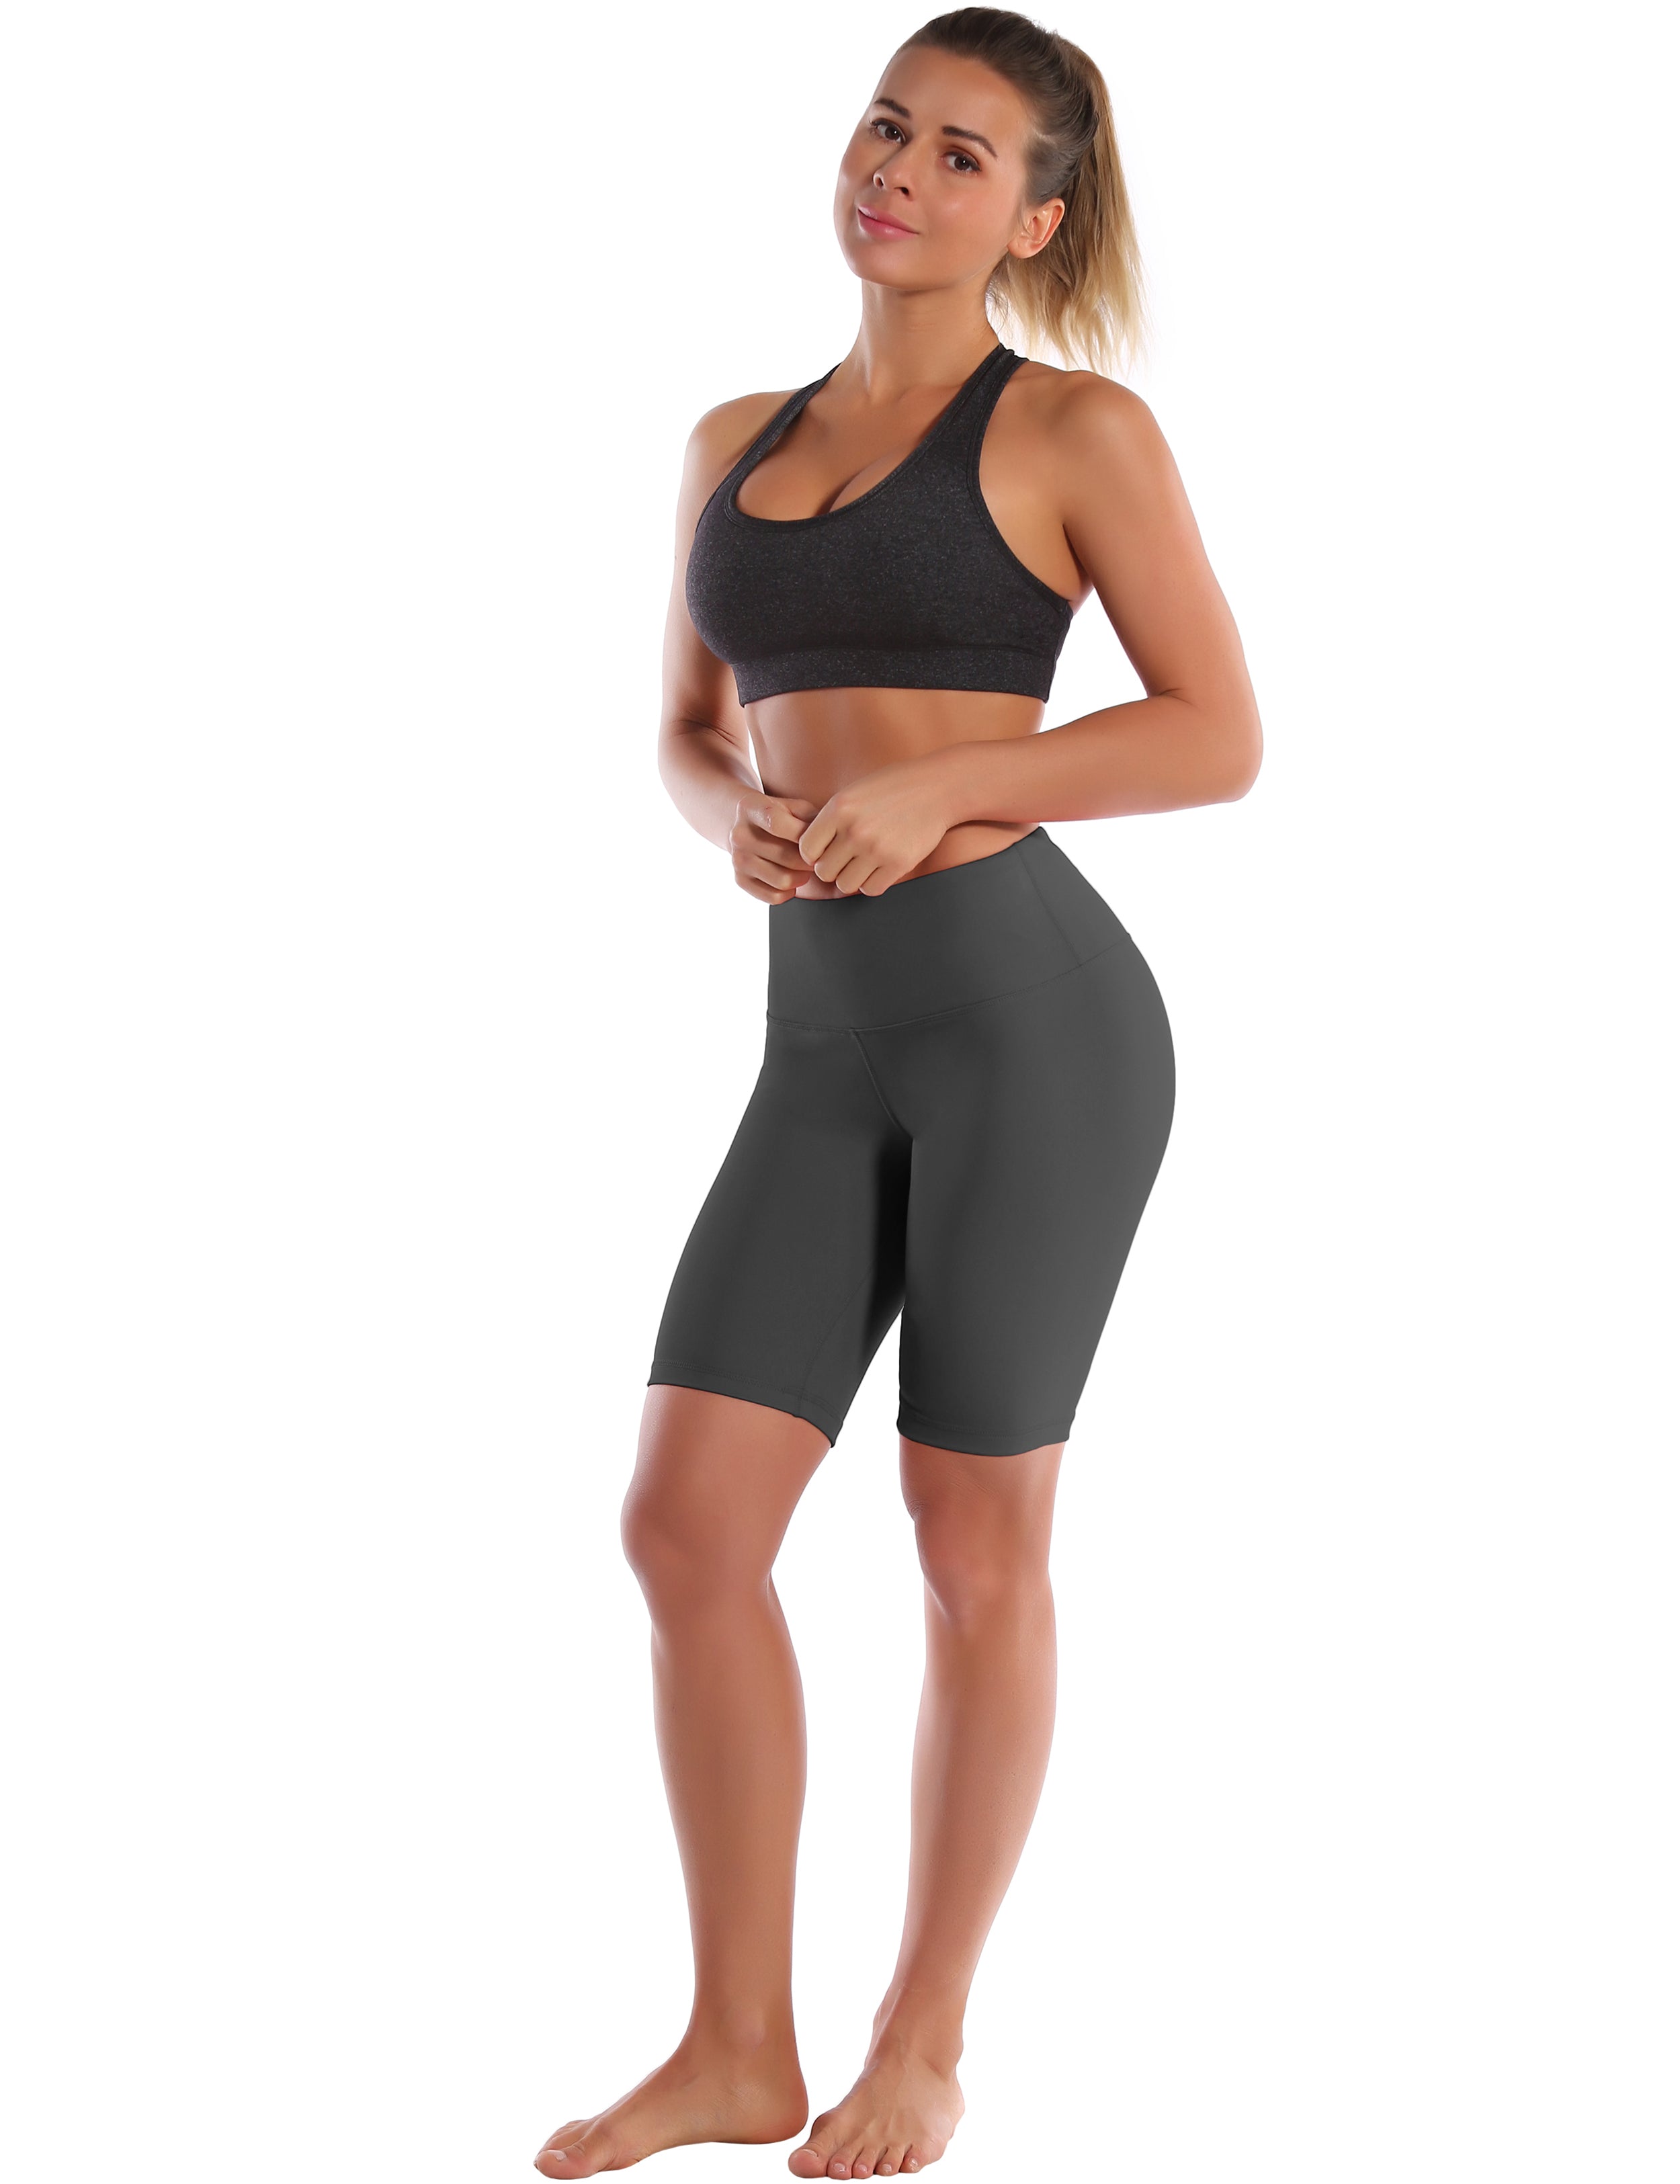 8" High Waist Pilates Shorts shadowcharcoal Sleek, soft, smooth and totally comfortable: our newest style is here. Softest-ever fabric High elasticity High density 4-way stretch Fabric doesn't attract lint easily No see-through Moisture-wicking Machine wash 75% Nylon, 25% Spandex